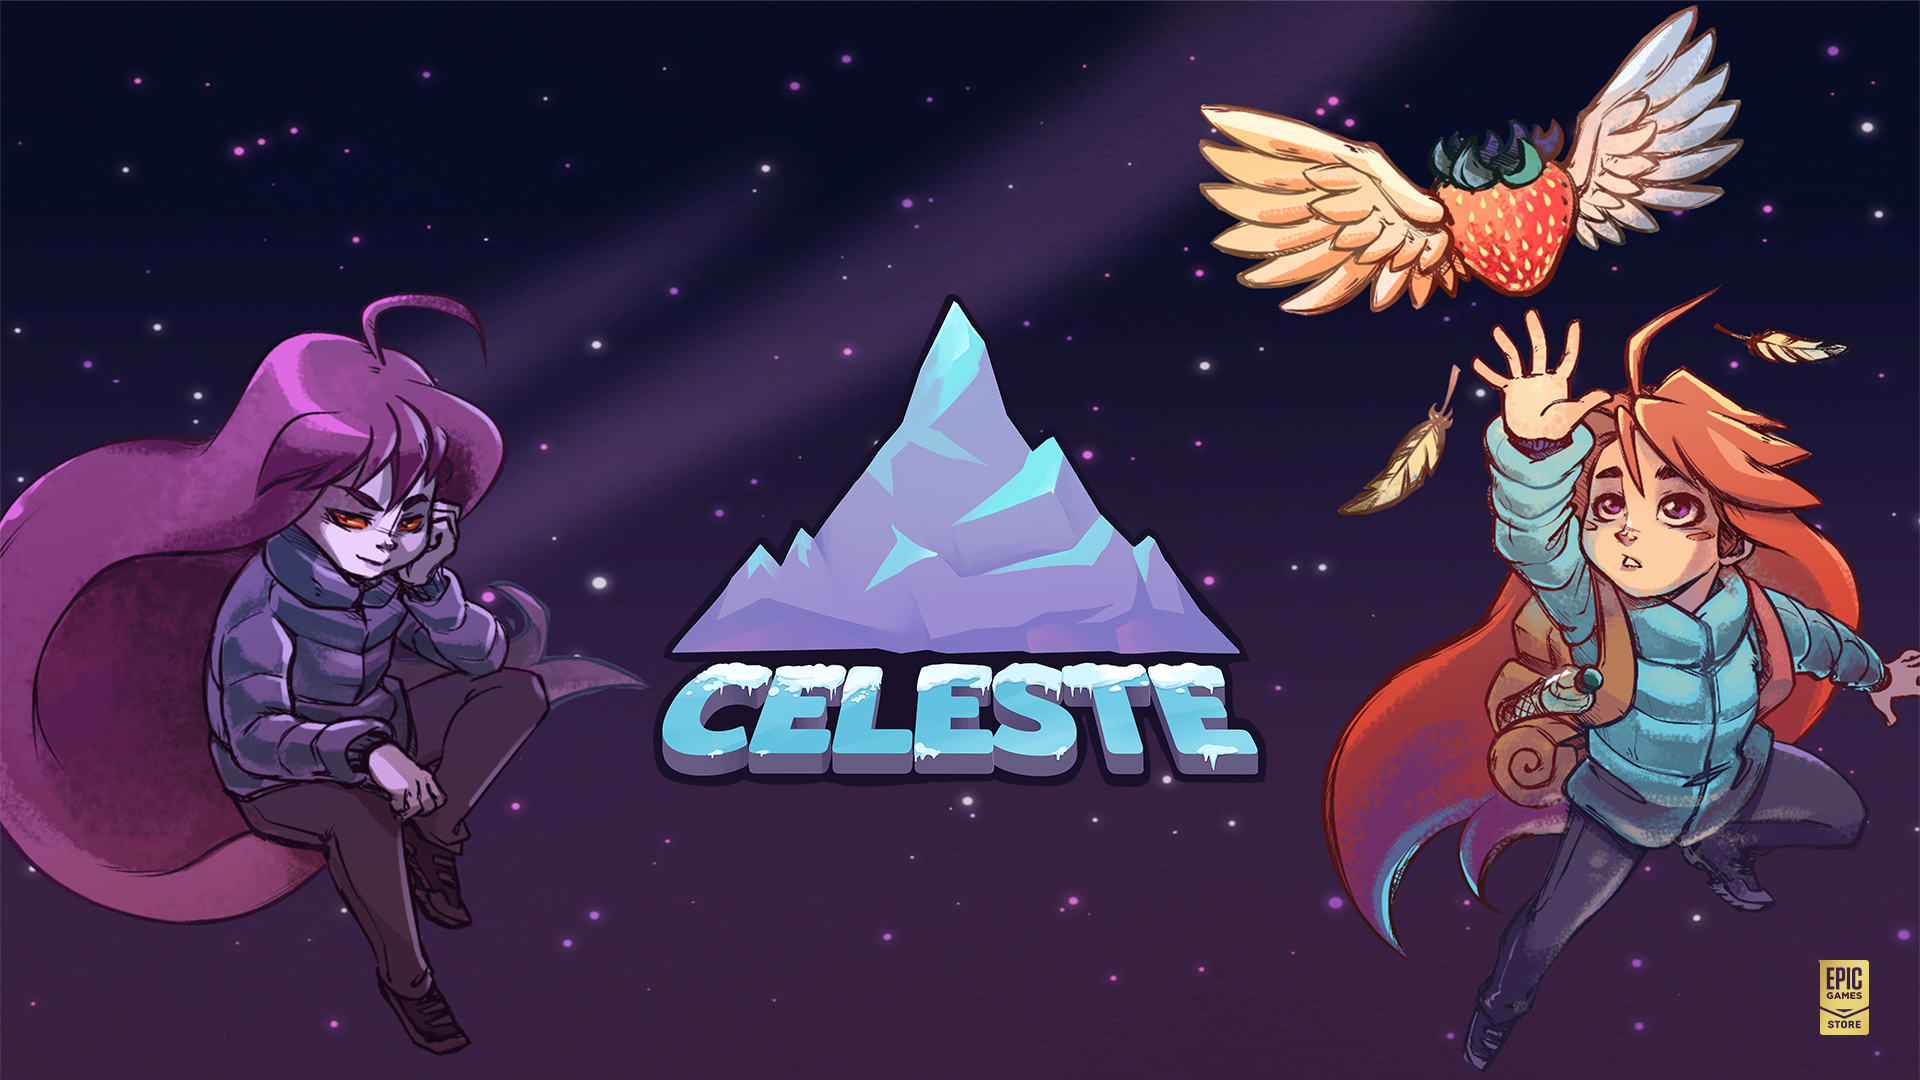 Celestia Ultimate  Download and Play for Free - Epic Games Store